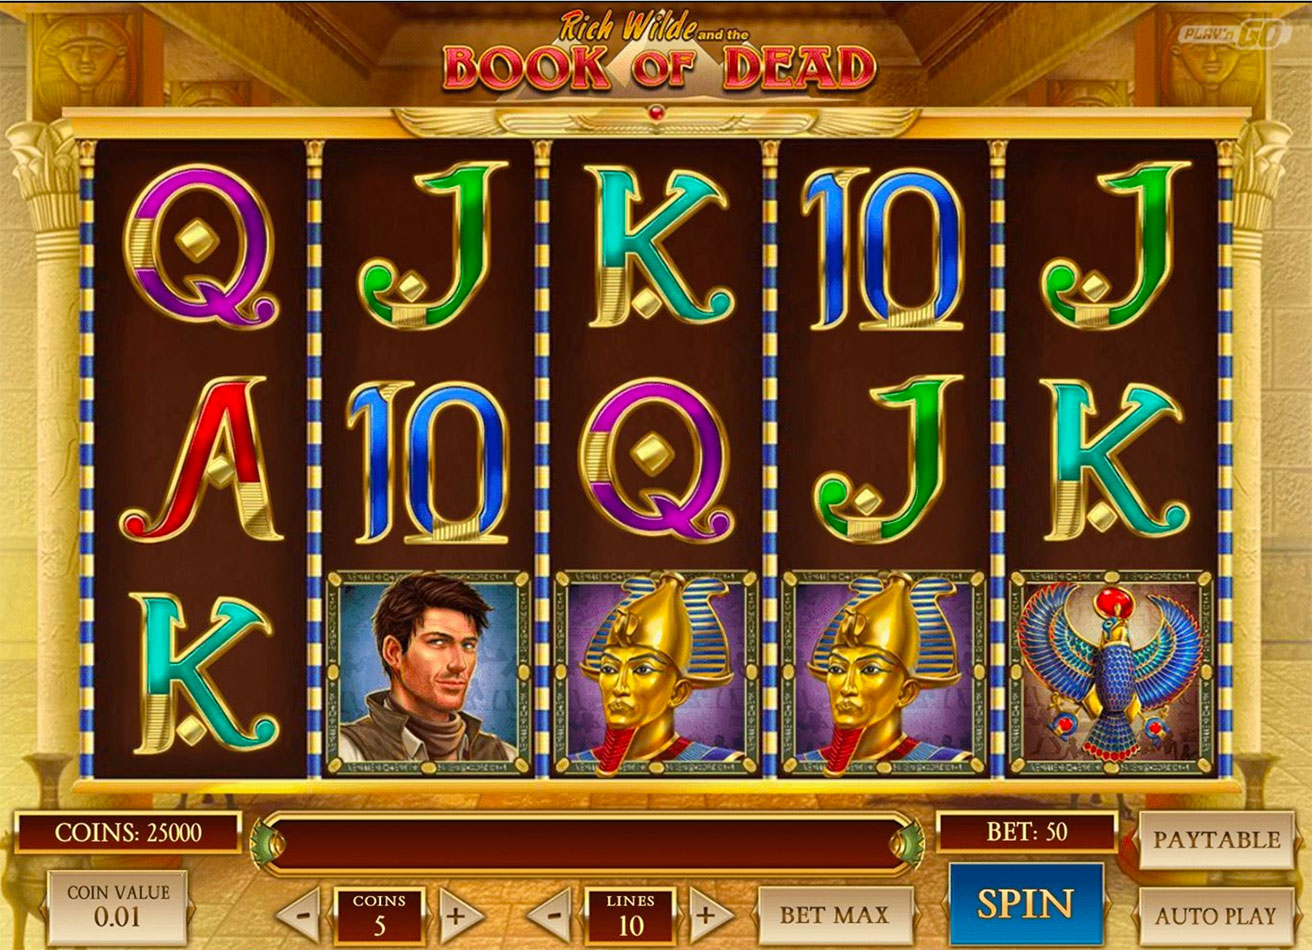 Rich Wilde and the Book of Dead Slot